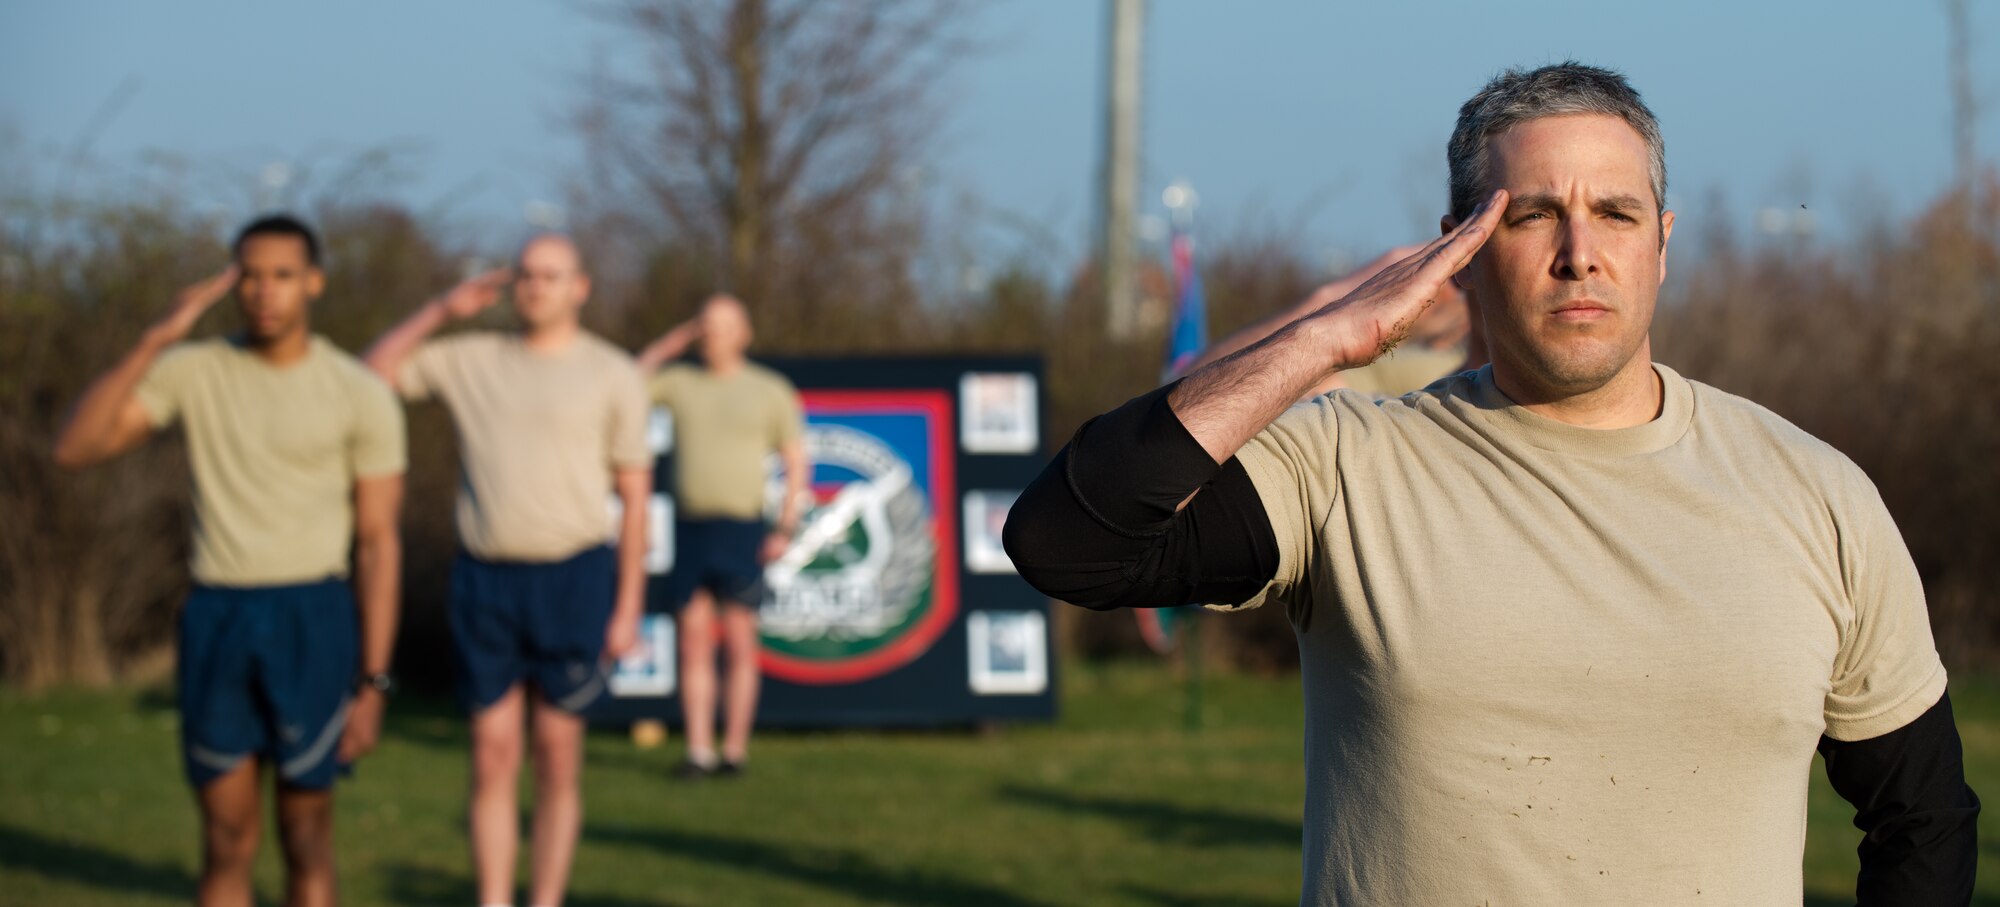 Master Sgt. Shawn Leonard, 4th Air Support Operations Group operations superintendent, renders a salute honoring fallen tactical air control party members March 27, 2014, at Grafenwoehr, Germany. At the end of the memorial run, the Airmen gathered to pay their respect to their fallen brothers. (U.S. Air Force photo/Senior Airman Jonathan Stefanko)